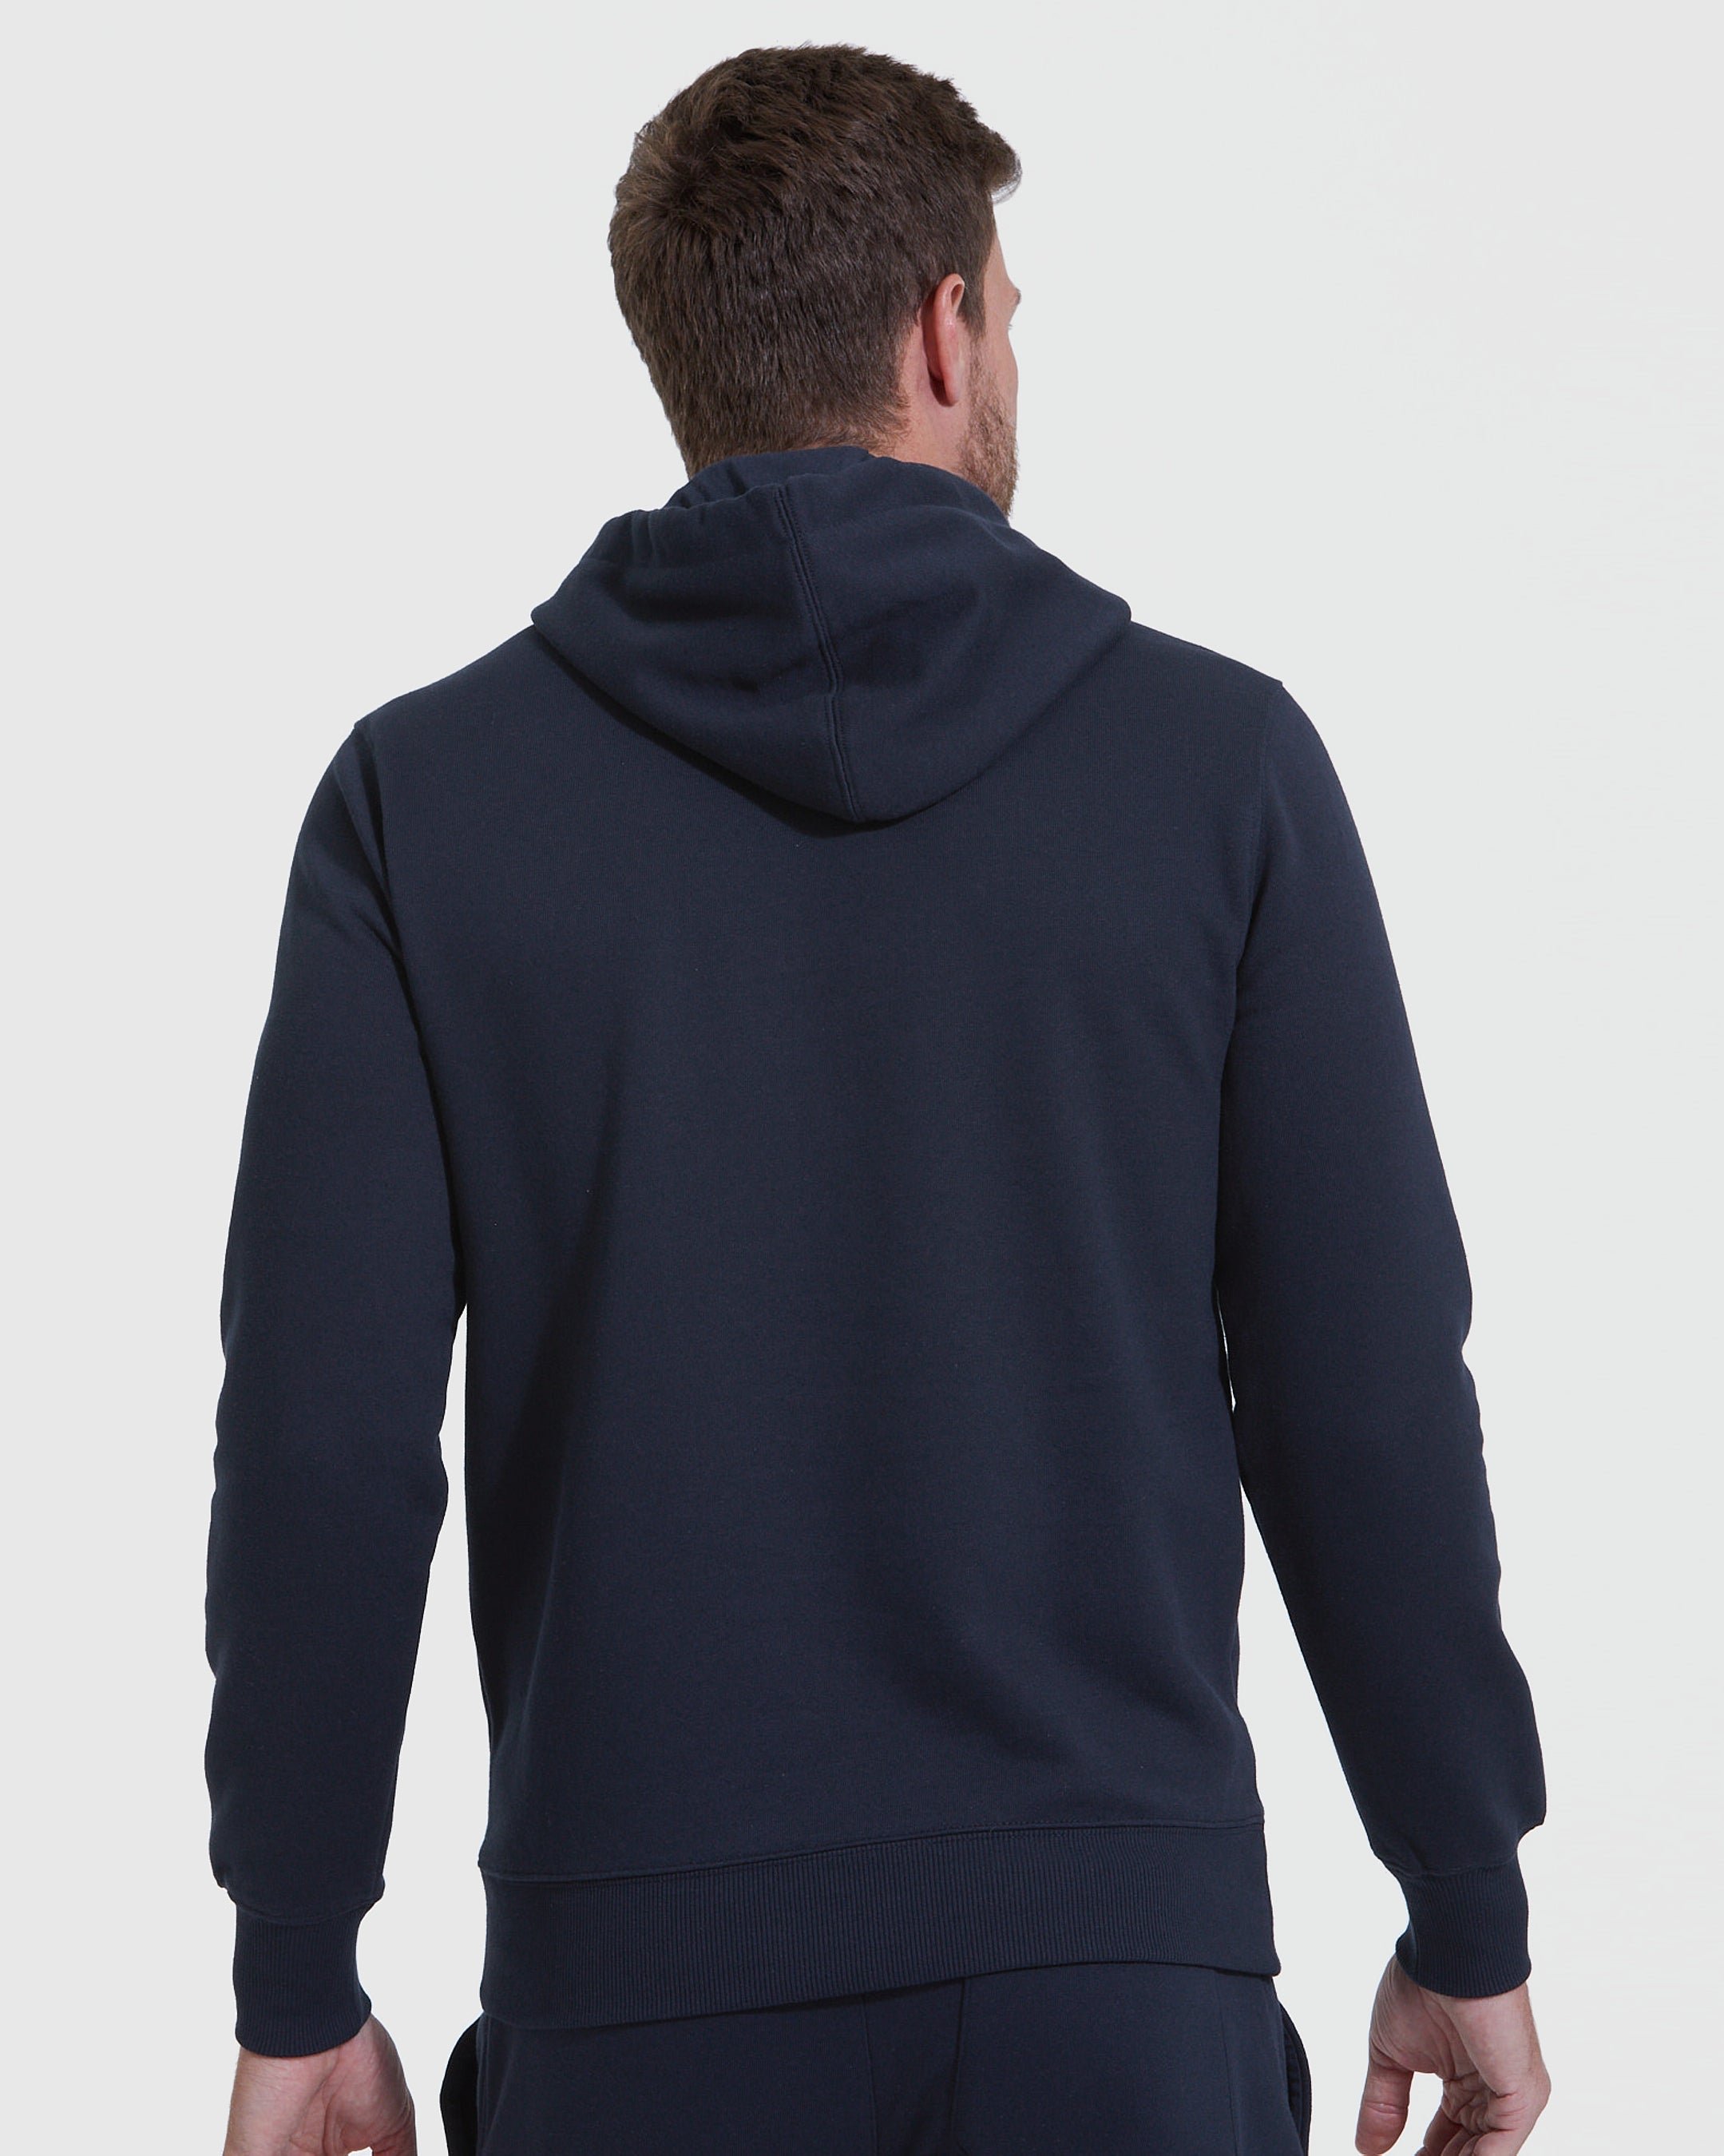 Navy Fleece French Terry Pullover Hoodie